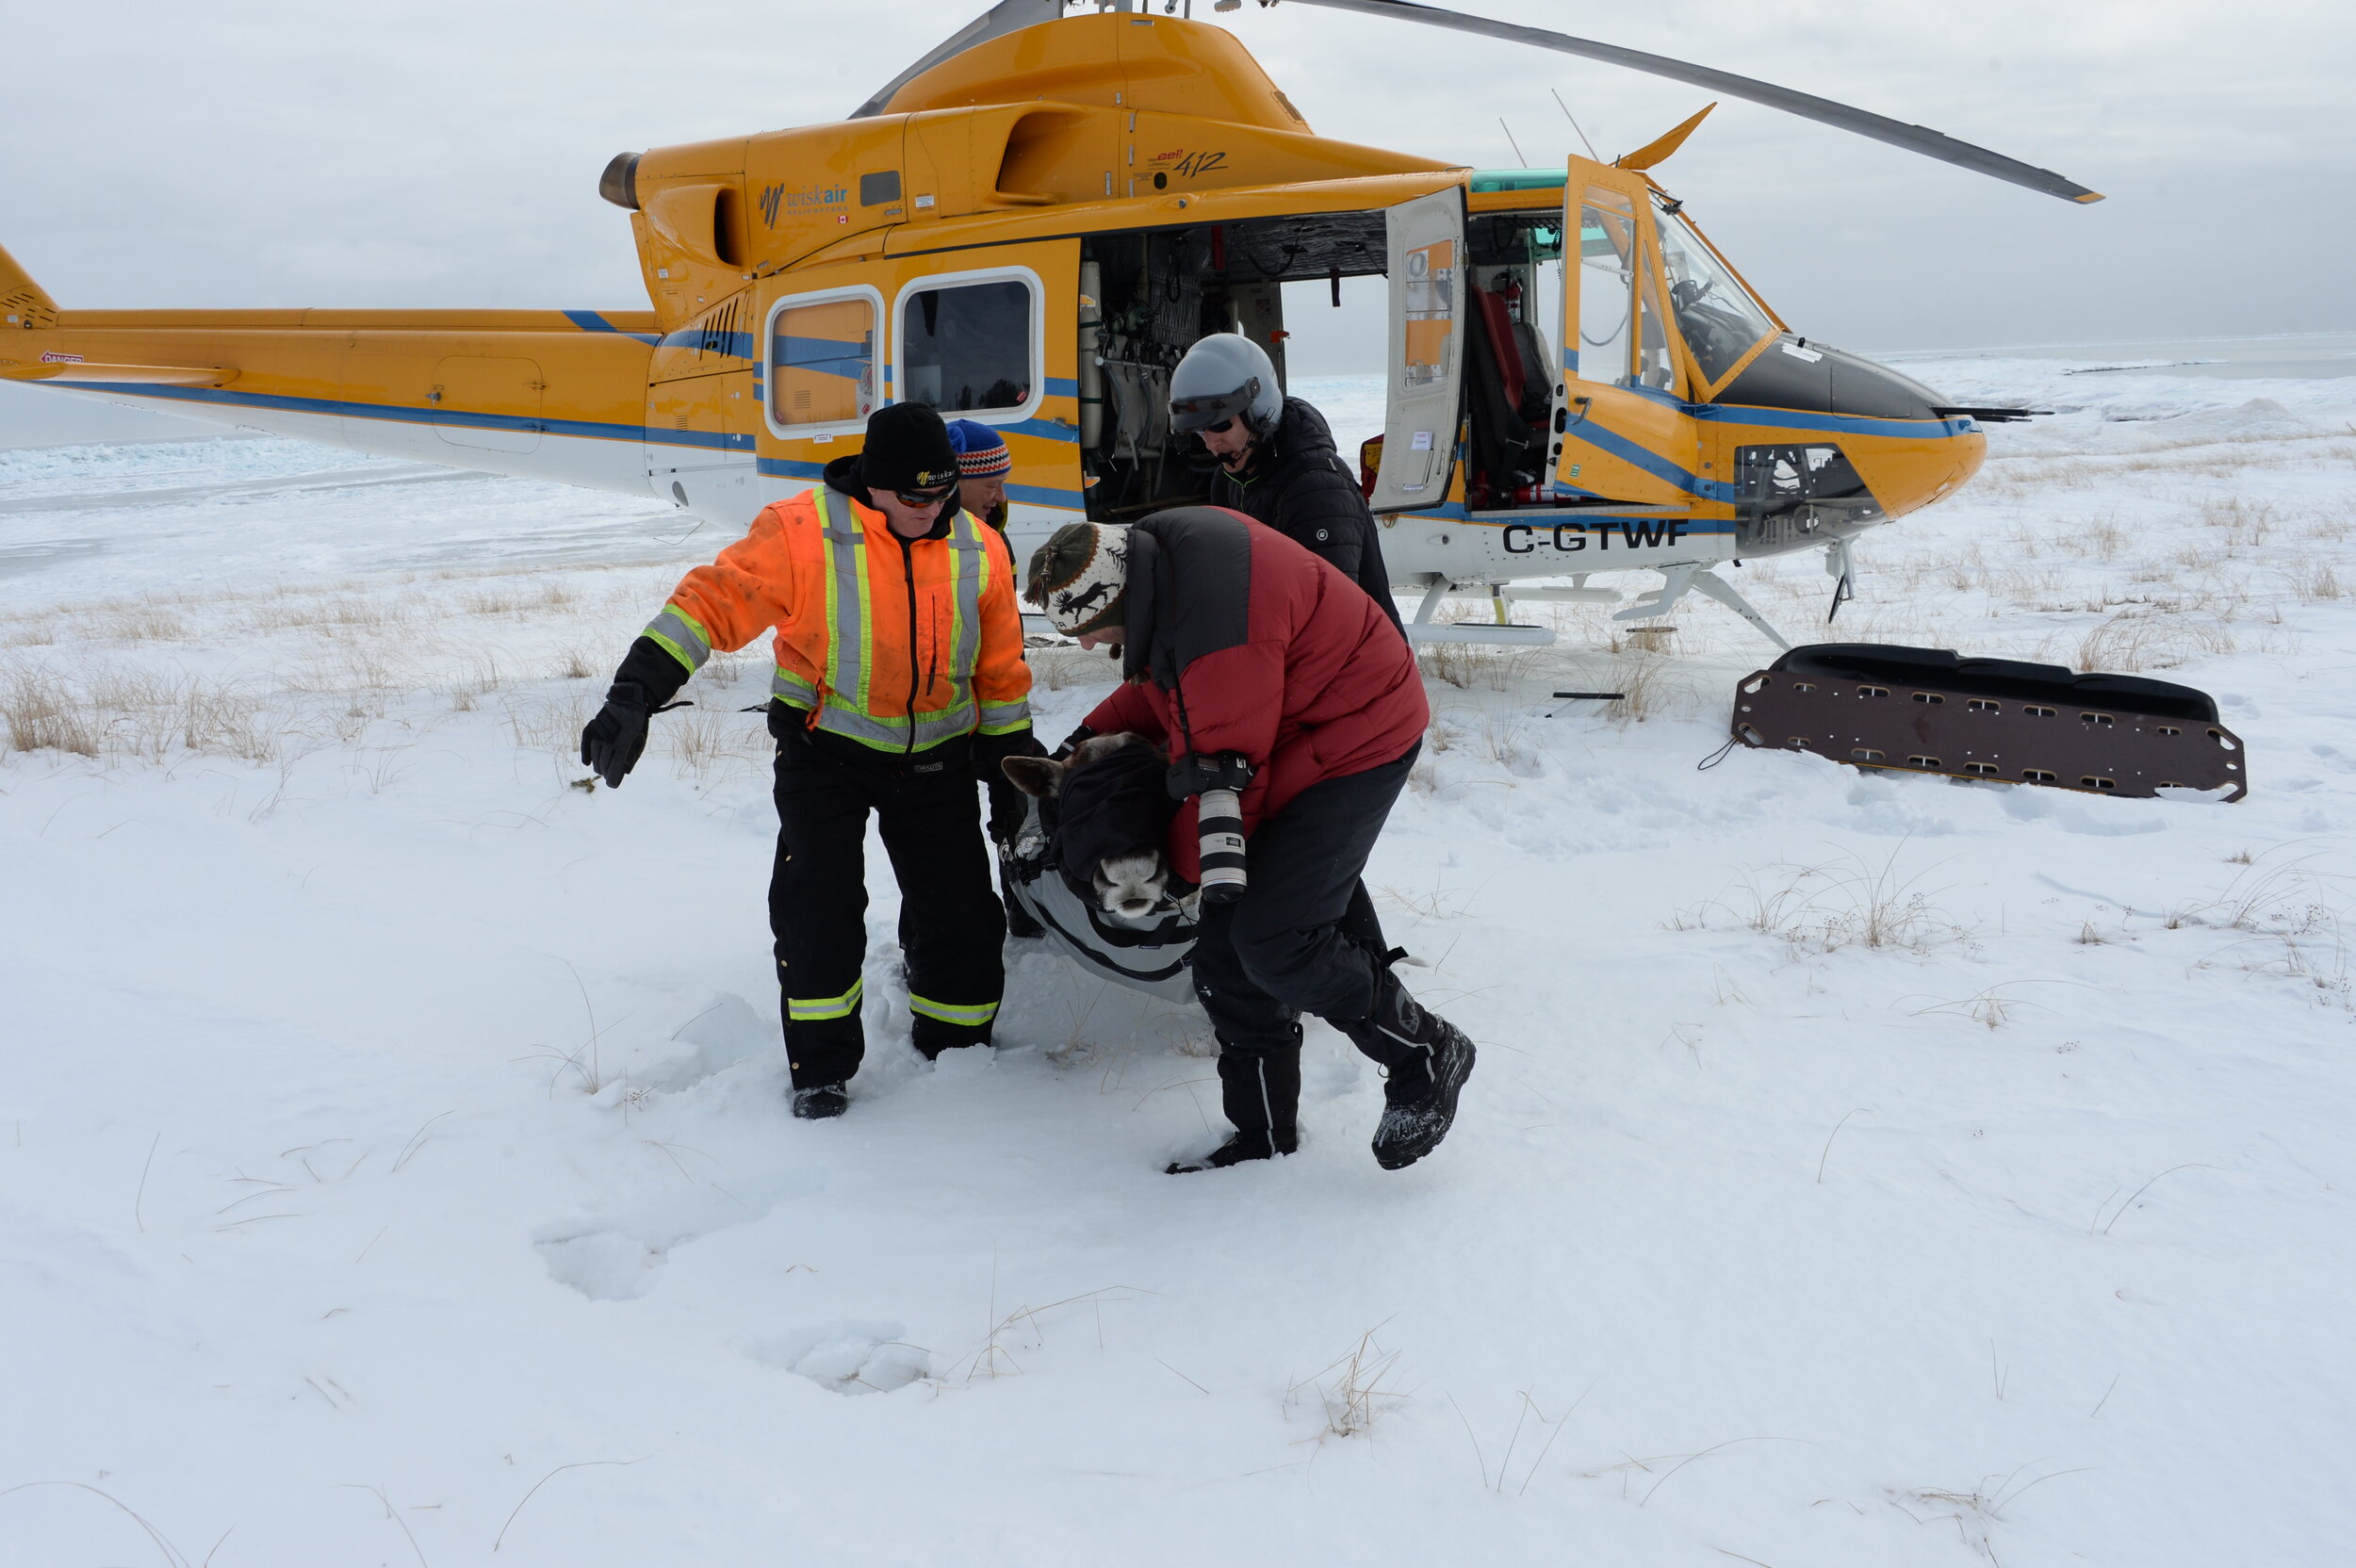 Three men in winter clothes carry a bound caribou out of a helicopter onto snow